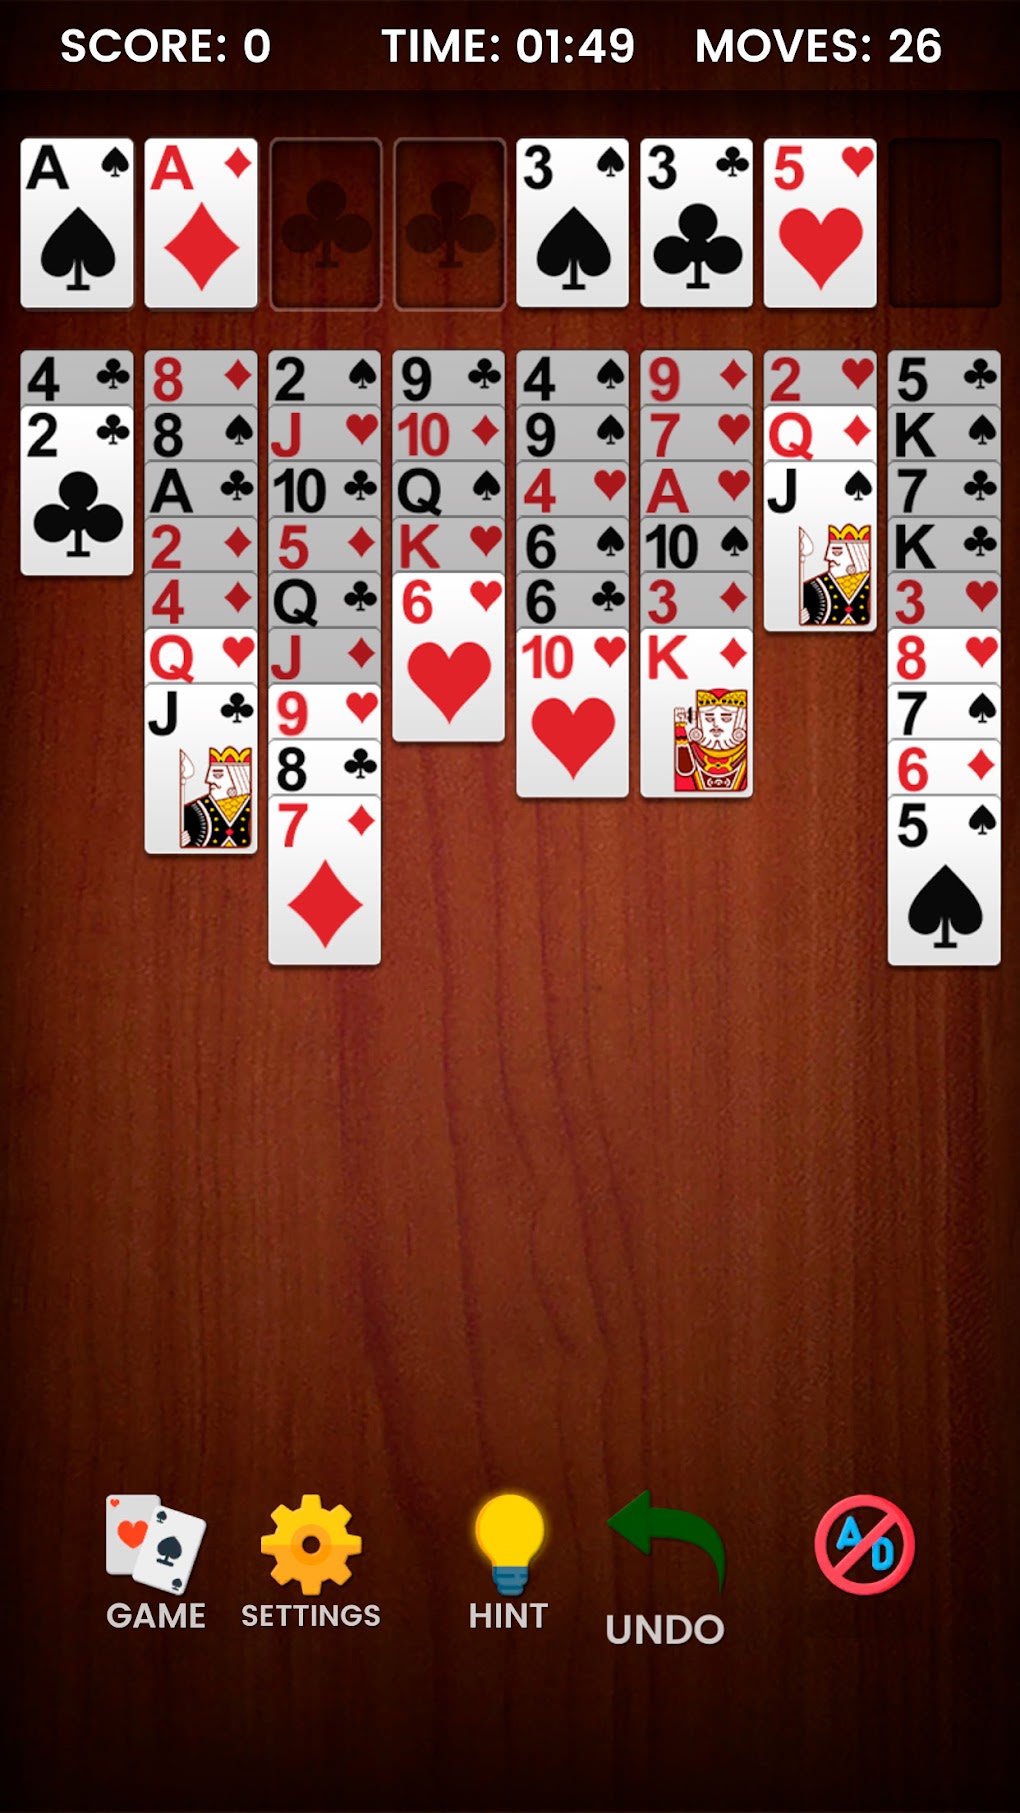 FreeCell Solitaire Pro - Apps on Google Play